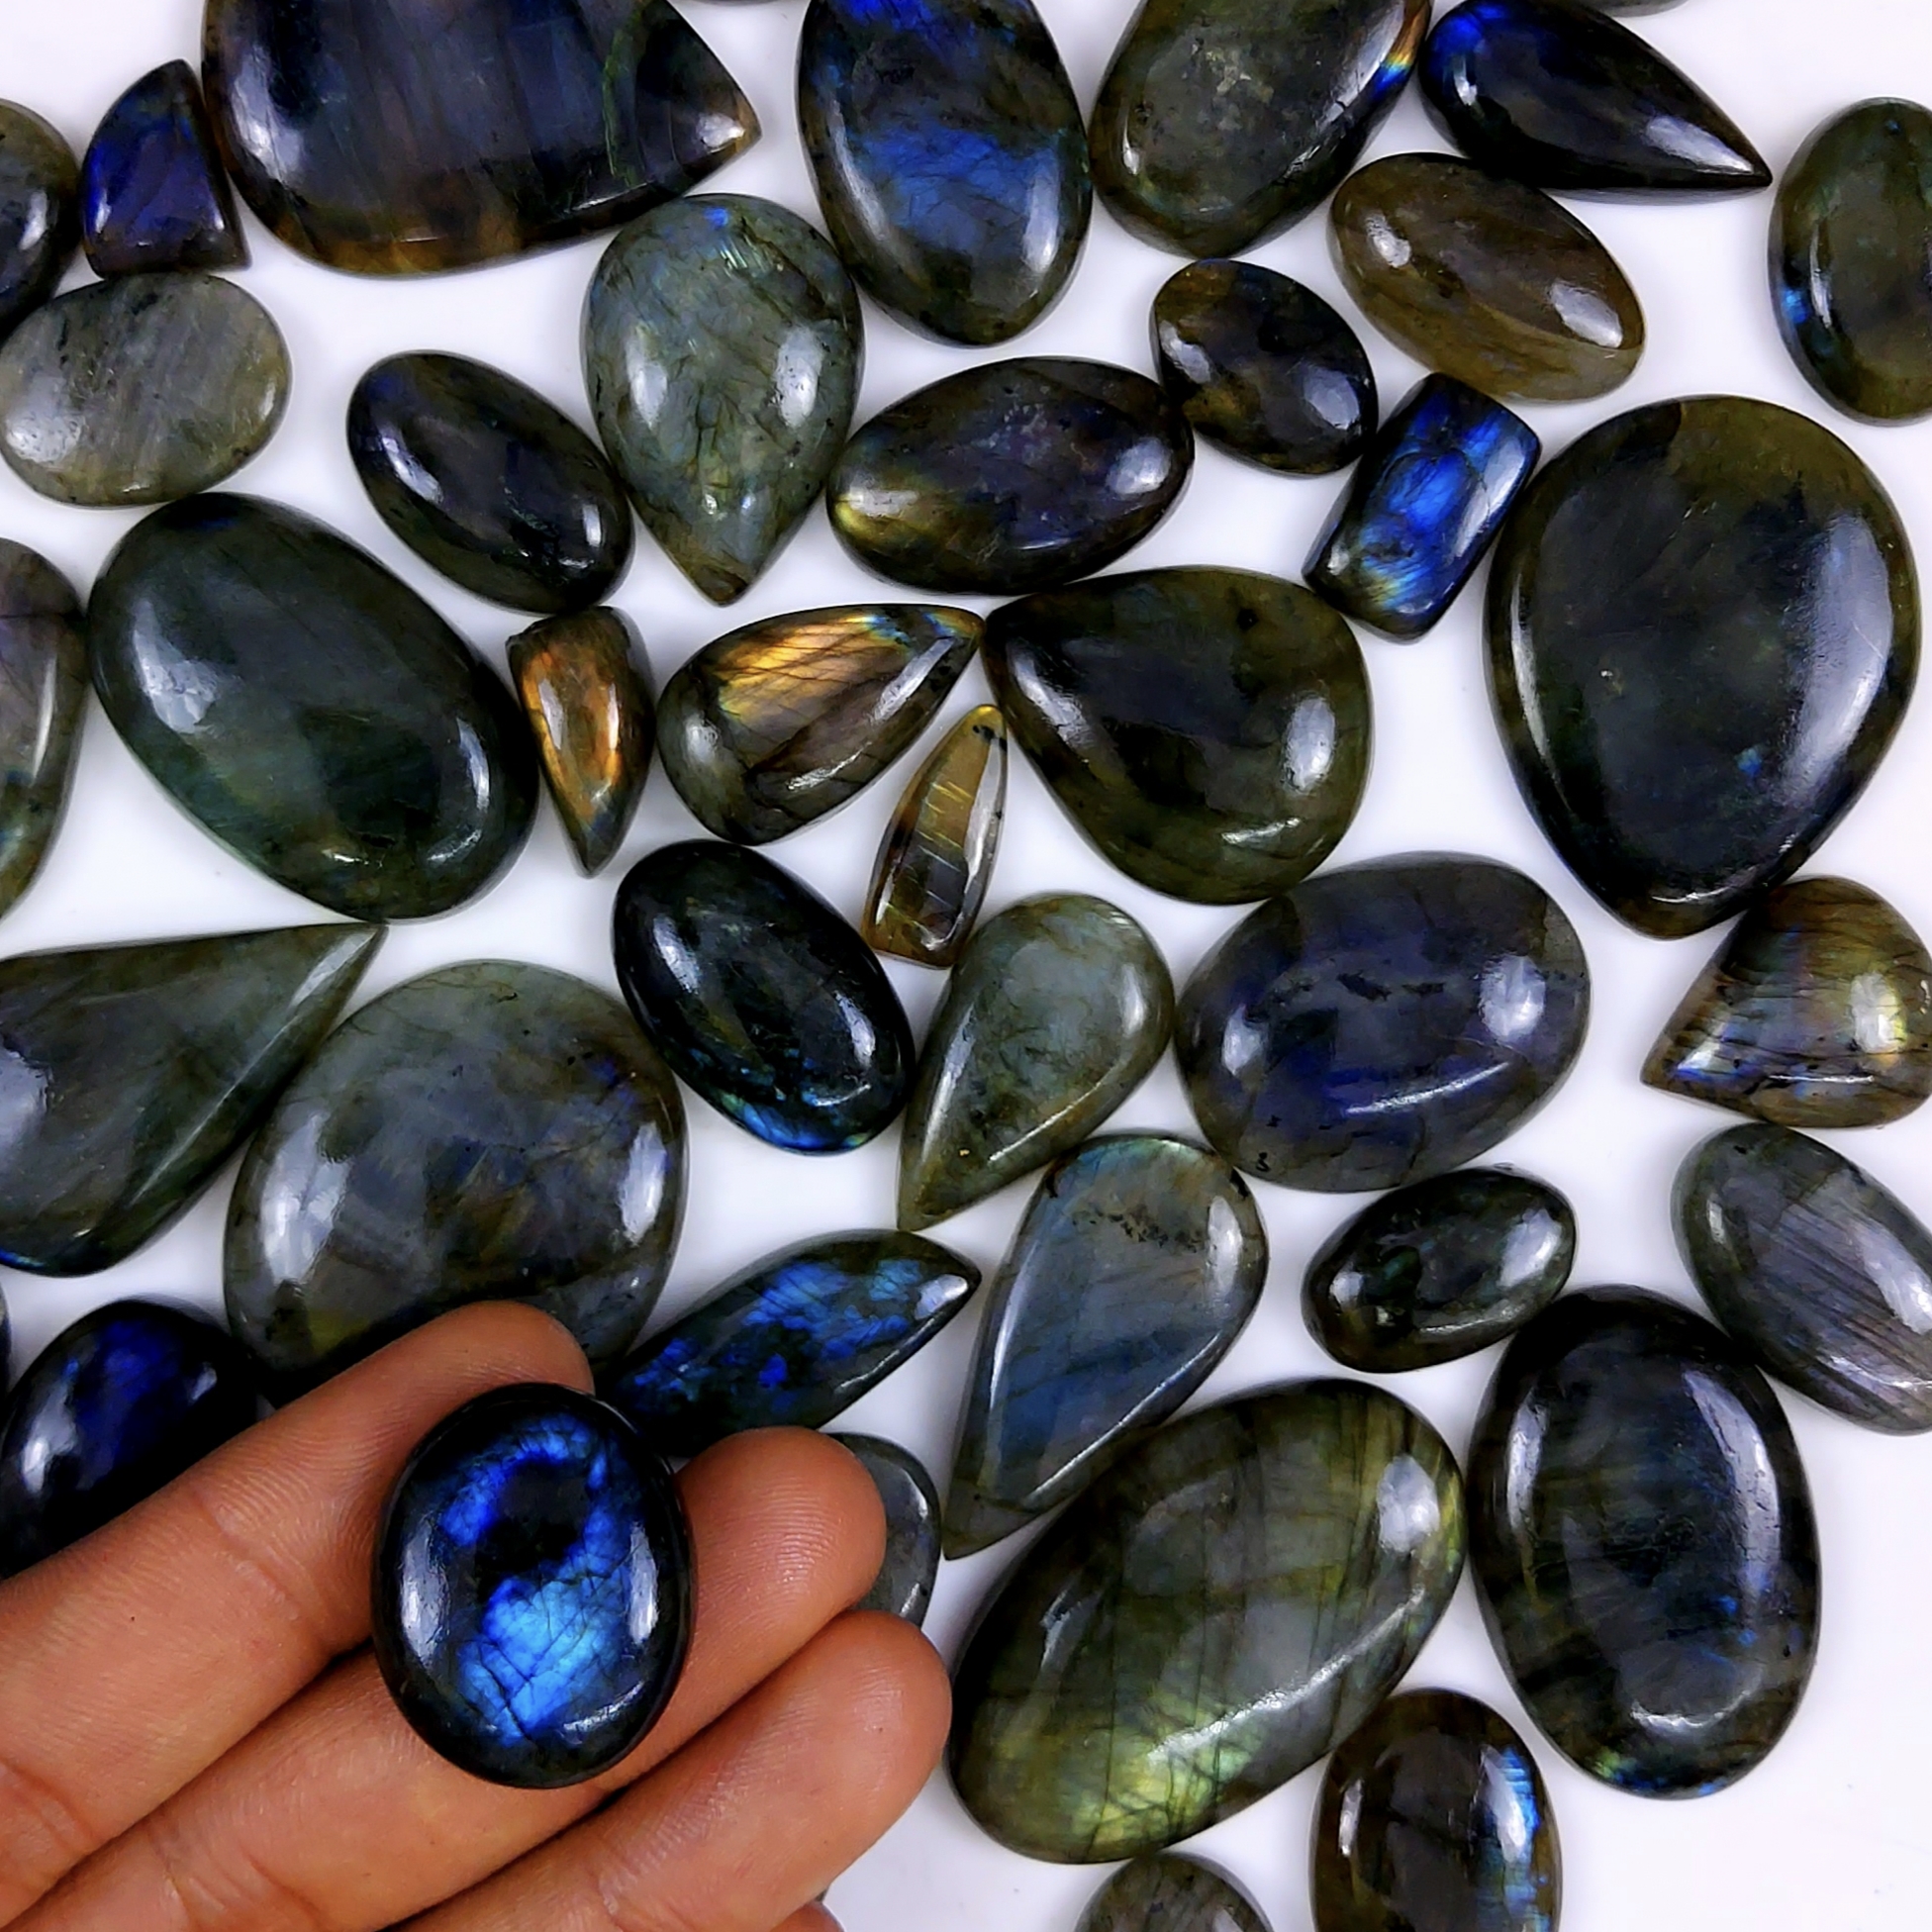 48pc 1765Cts Labradorite Cabochon Multifire Healing Crystal For Jewelry Supplies, Labradorite Necklace Handmade Wire Wrapped Gemstone Pendant 40x35 16x13mm#6351